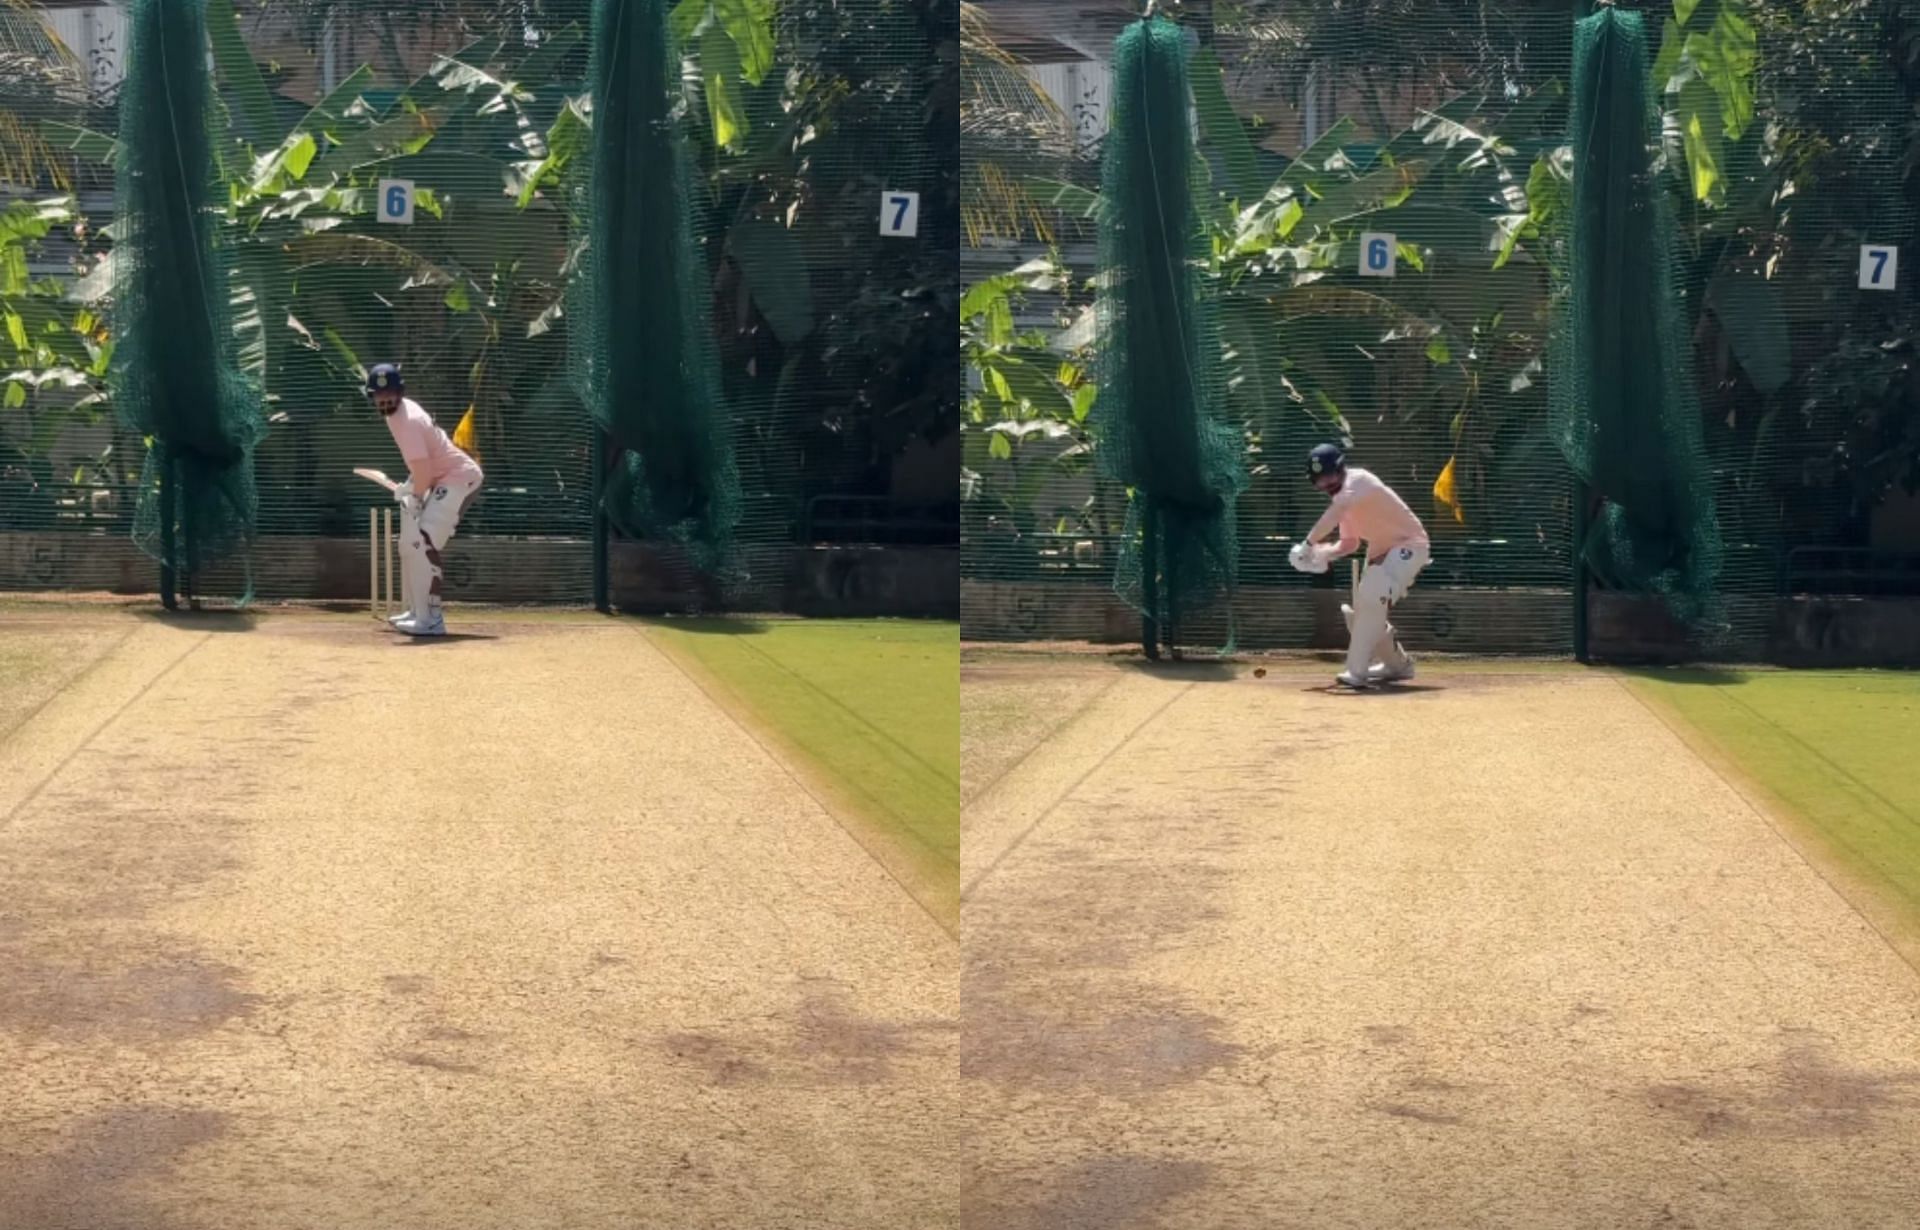 KL Rahul practicing in the nets ahead of 3rd Test. 